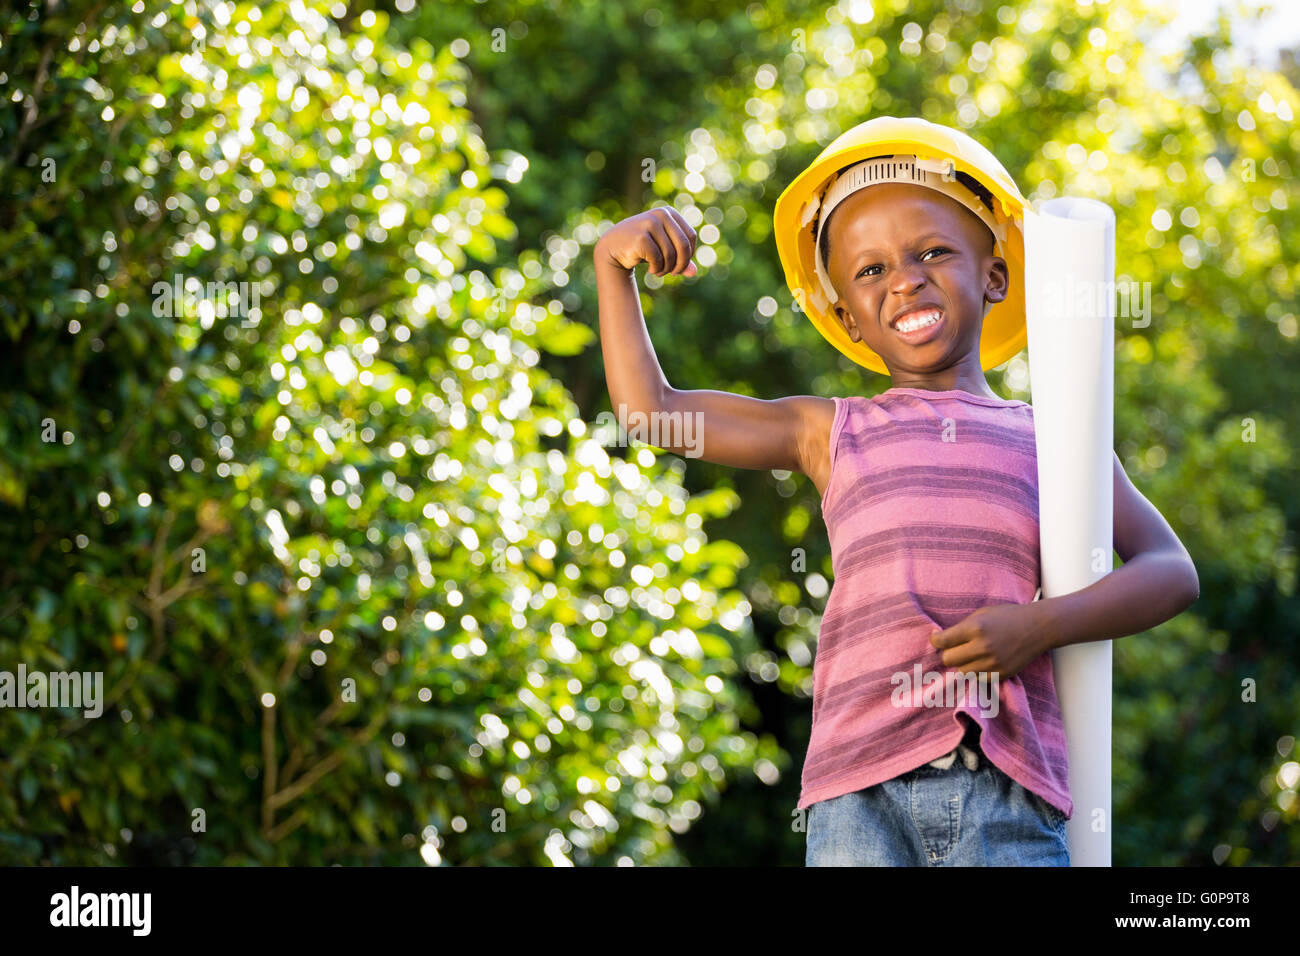 Boy is wearinf a hardhat Stock Photo